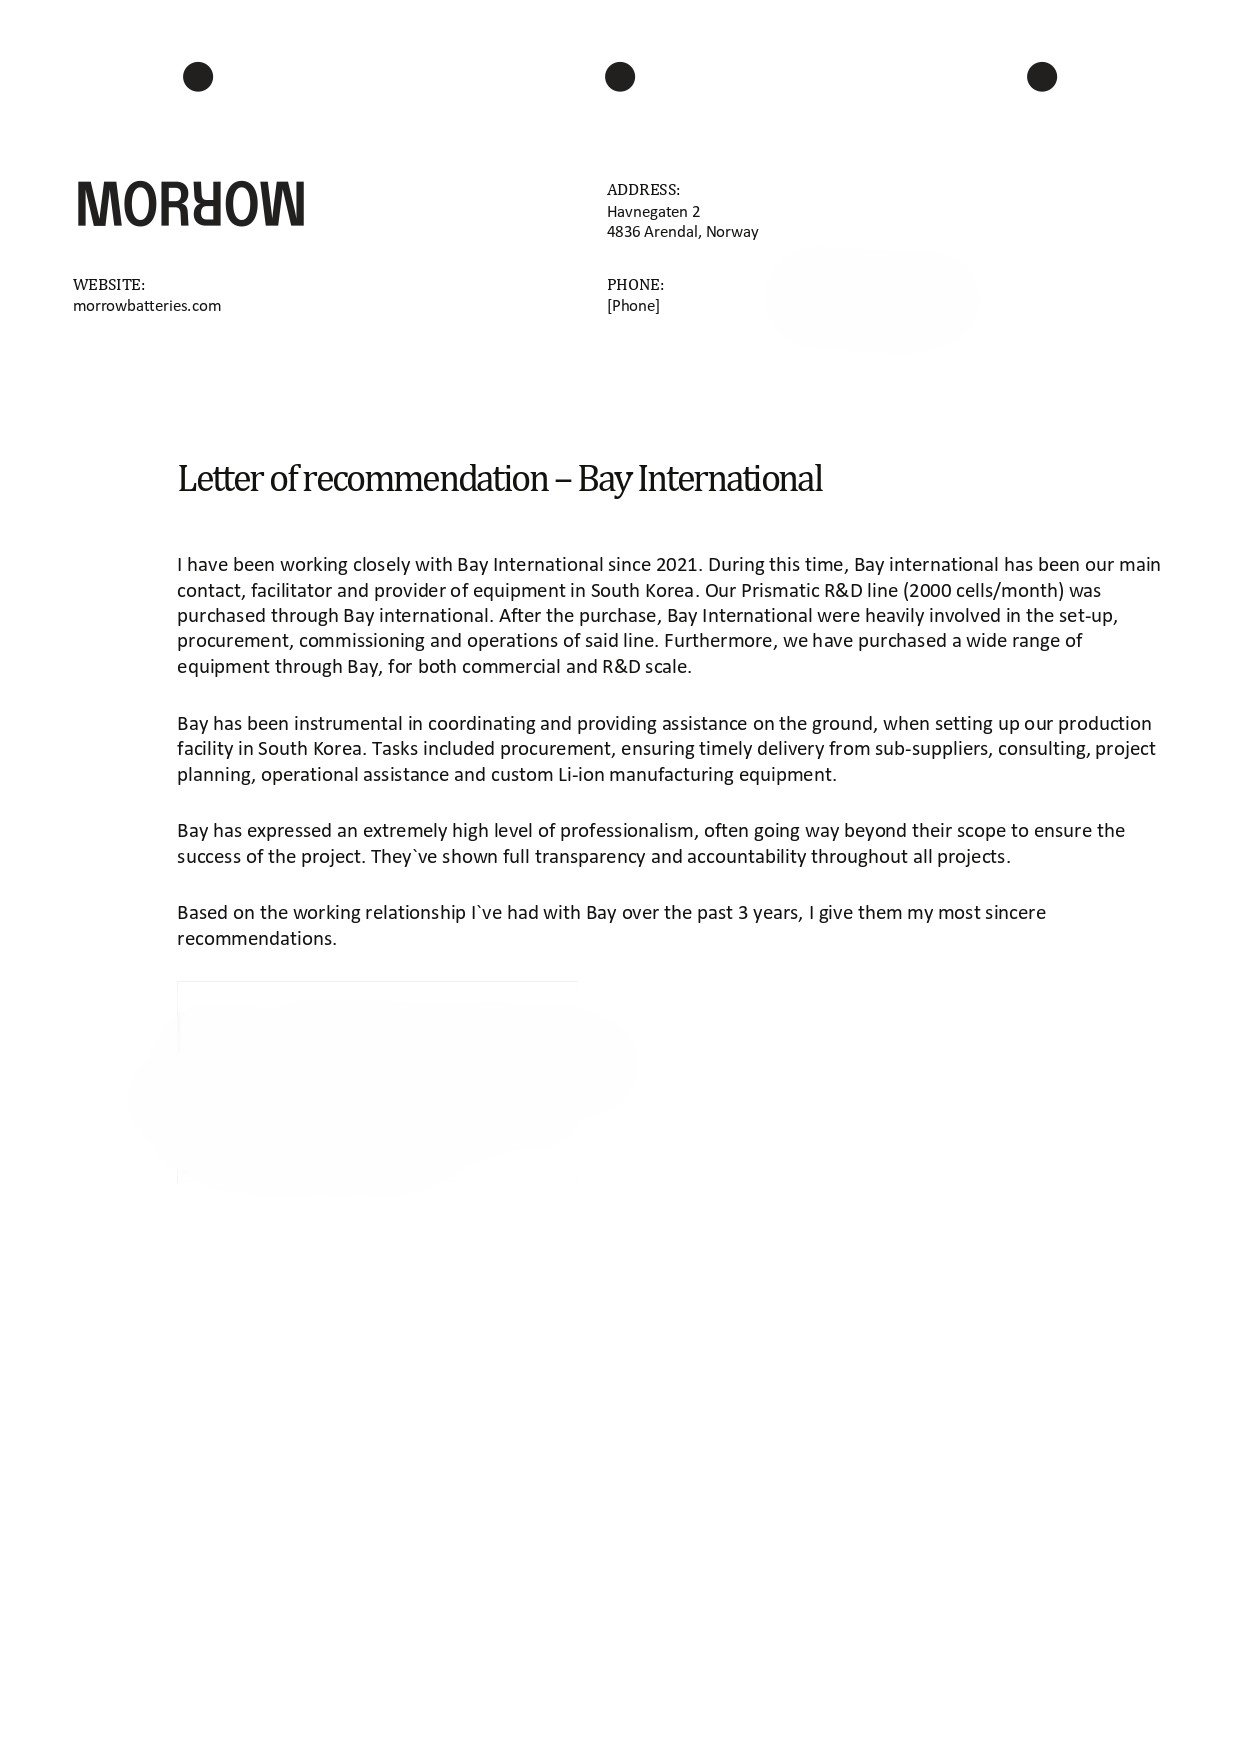 Our Partner&#39;s Letter of Recommendation